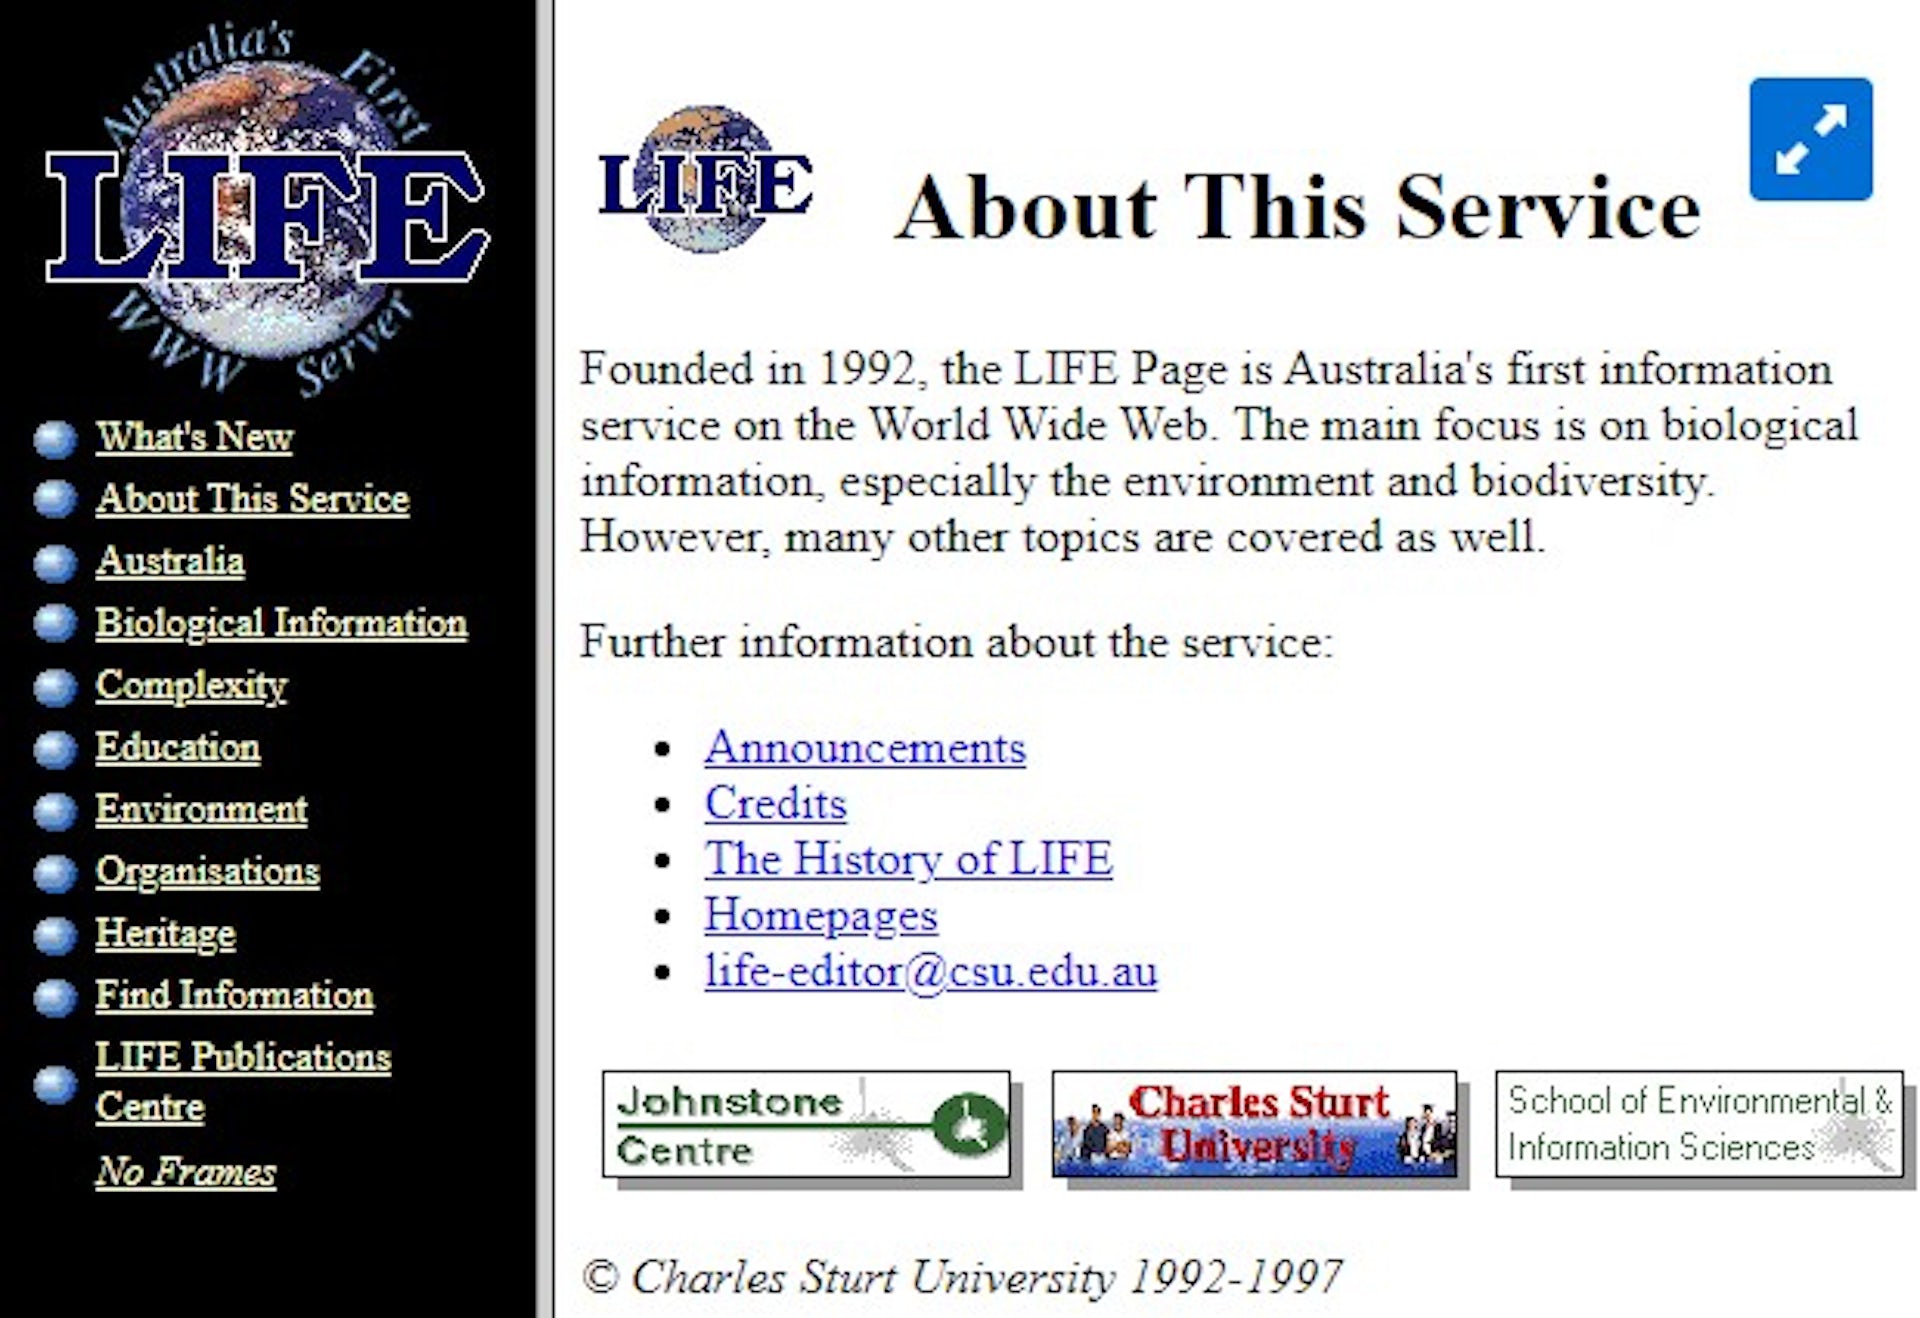 Three decades of the web in Australia: How Australians shaped the early internet